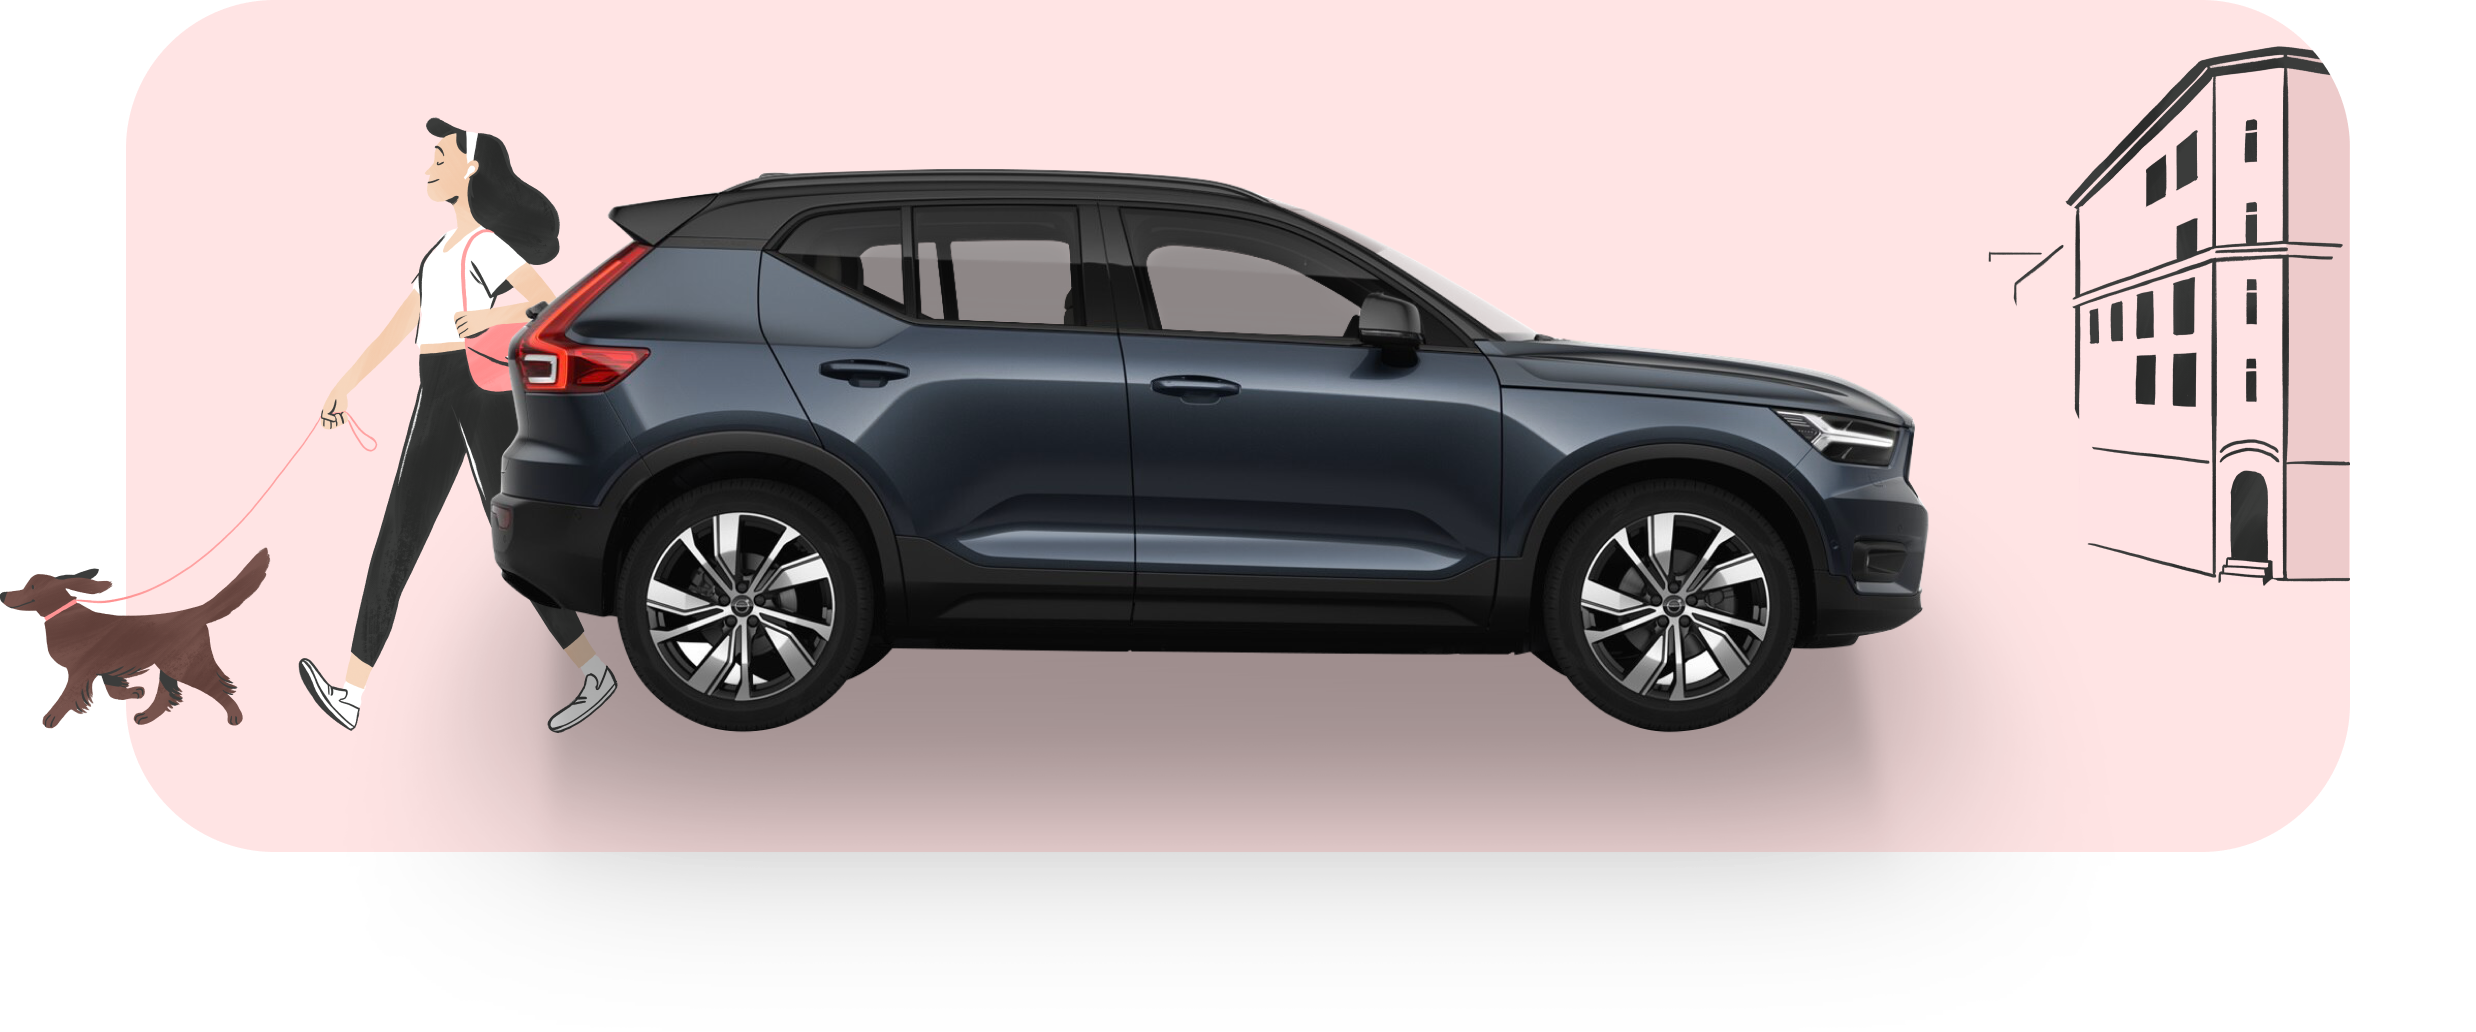 Image of a Volvo XC40 on display using the updated Volvo On Demand brand guidelines utilizing both illustration and animation